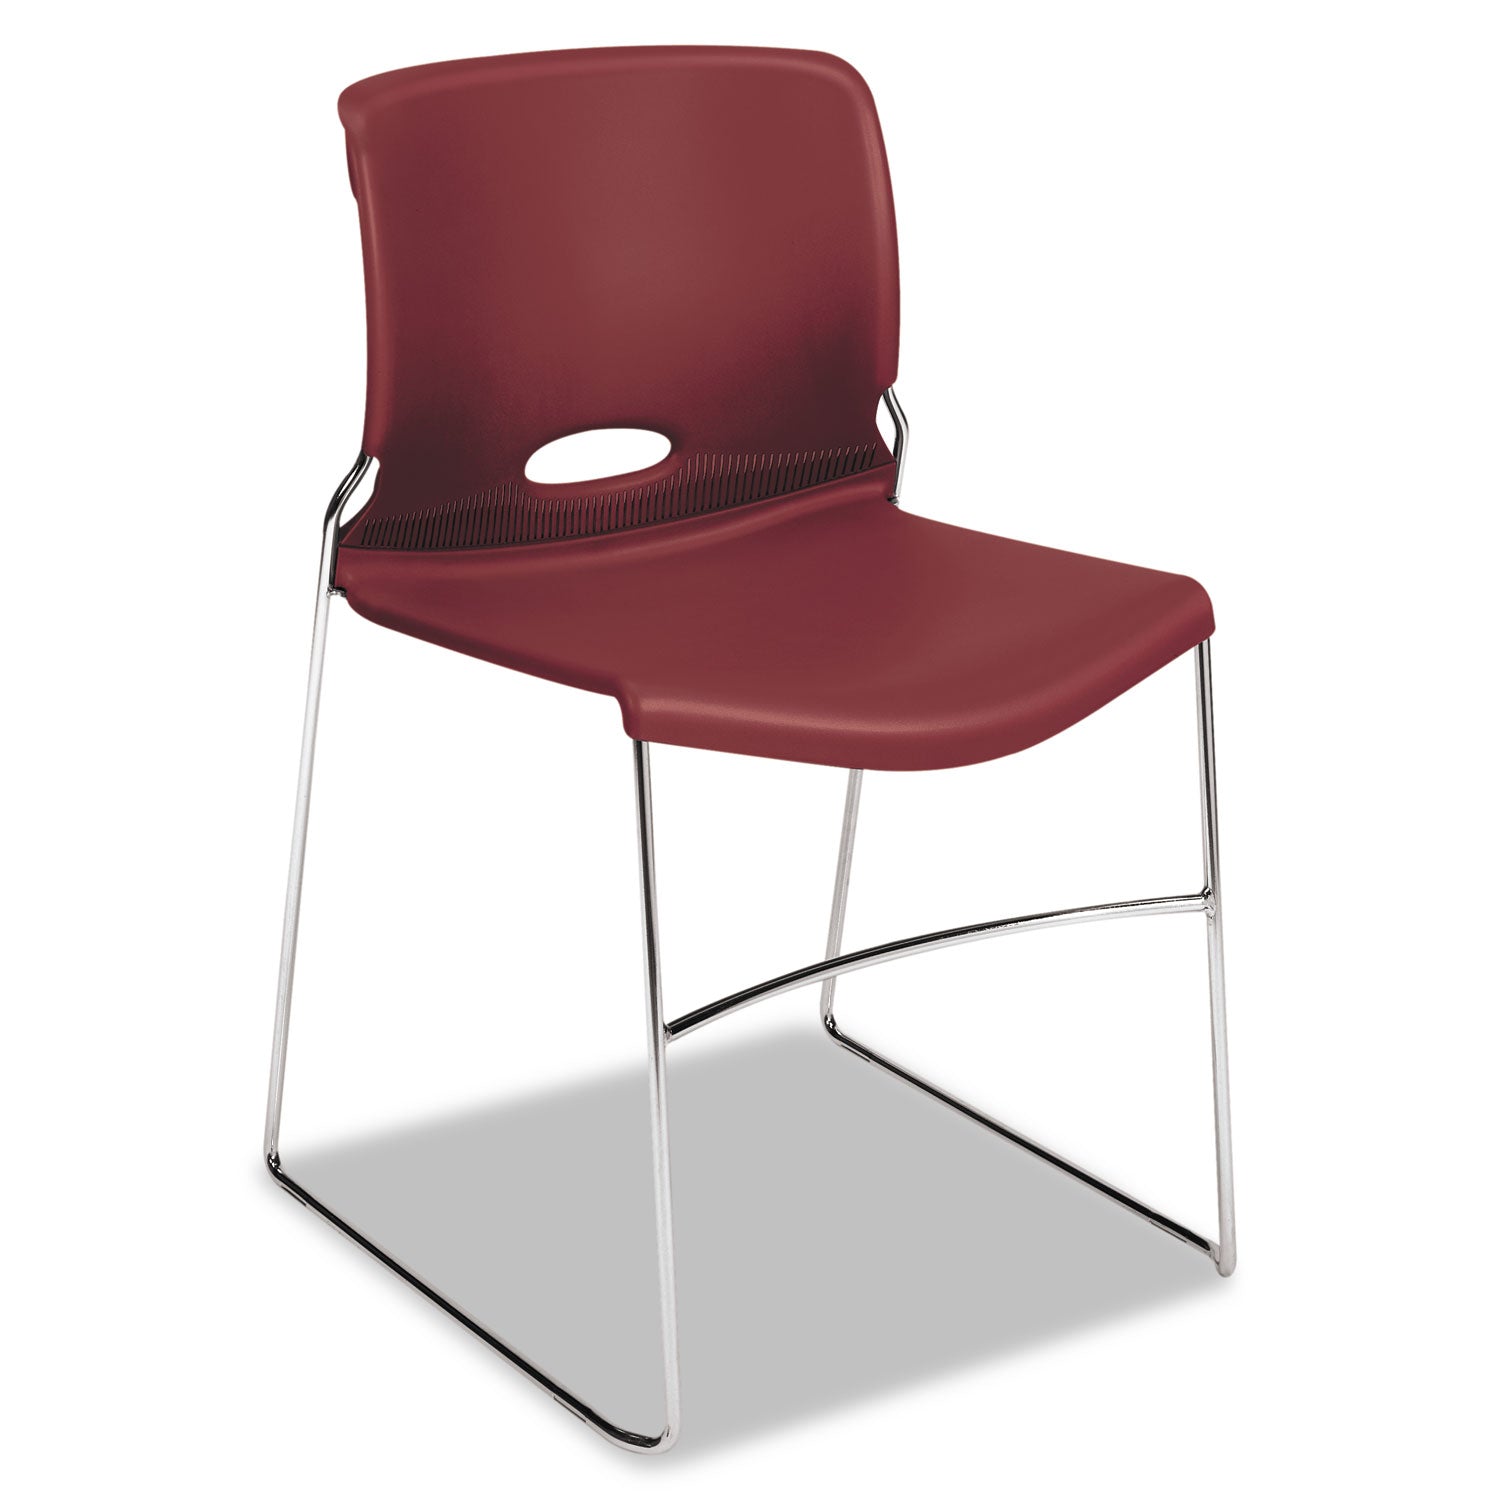 Olson Stacker High Density Chair, Supports 300 lb, 17.75" Seat Height, Mulberry Seat, Mulberry Back, Chrome Base, 4/Carton - 